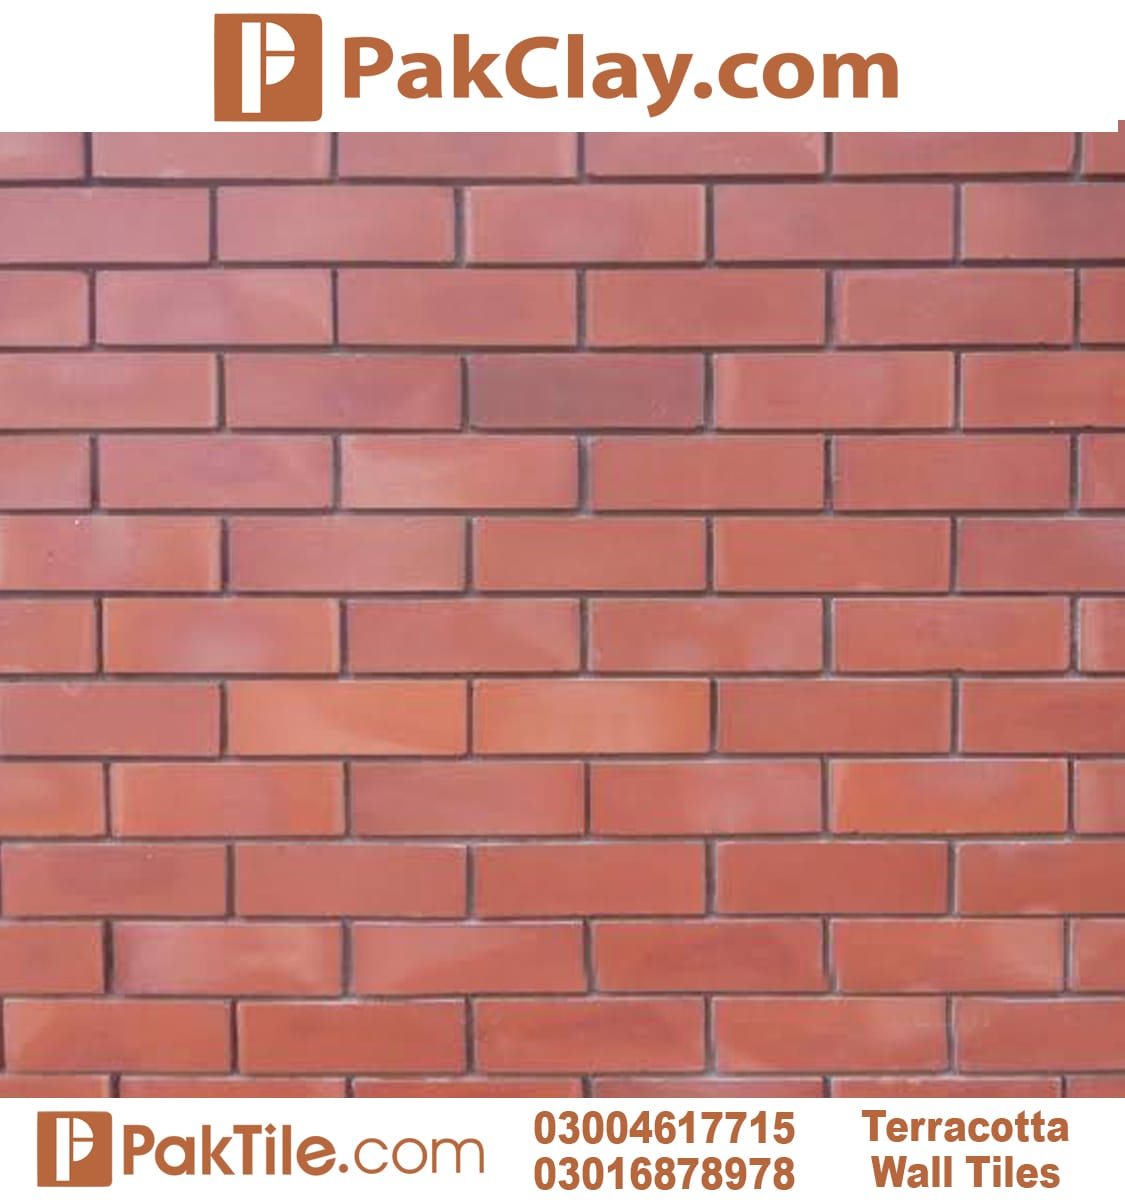 Front tiles rates in pakistan